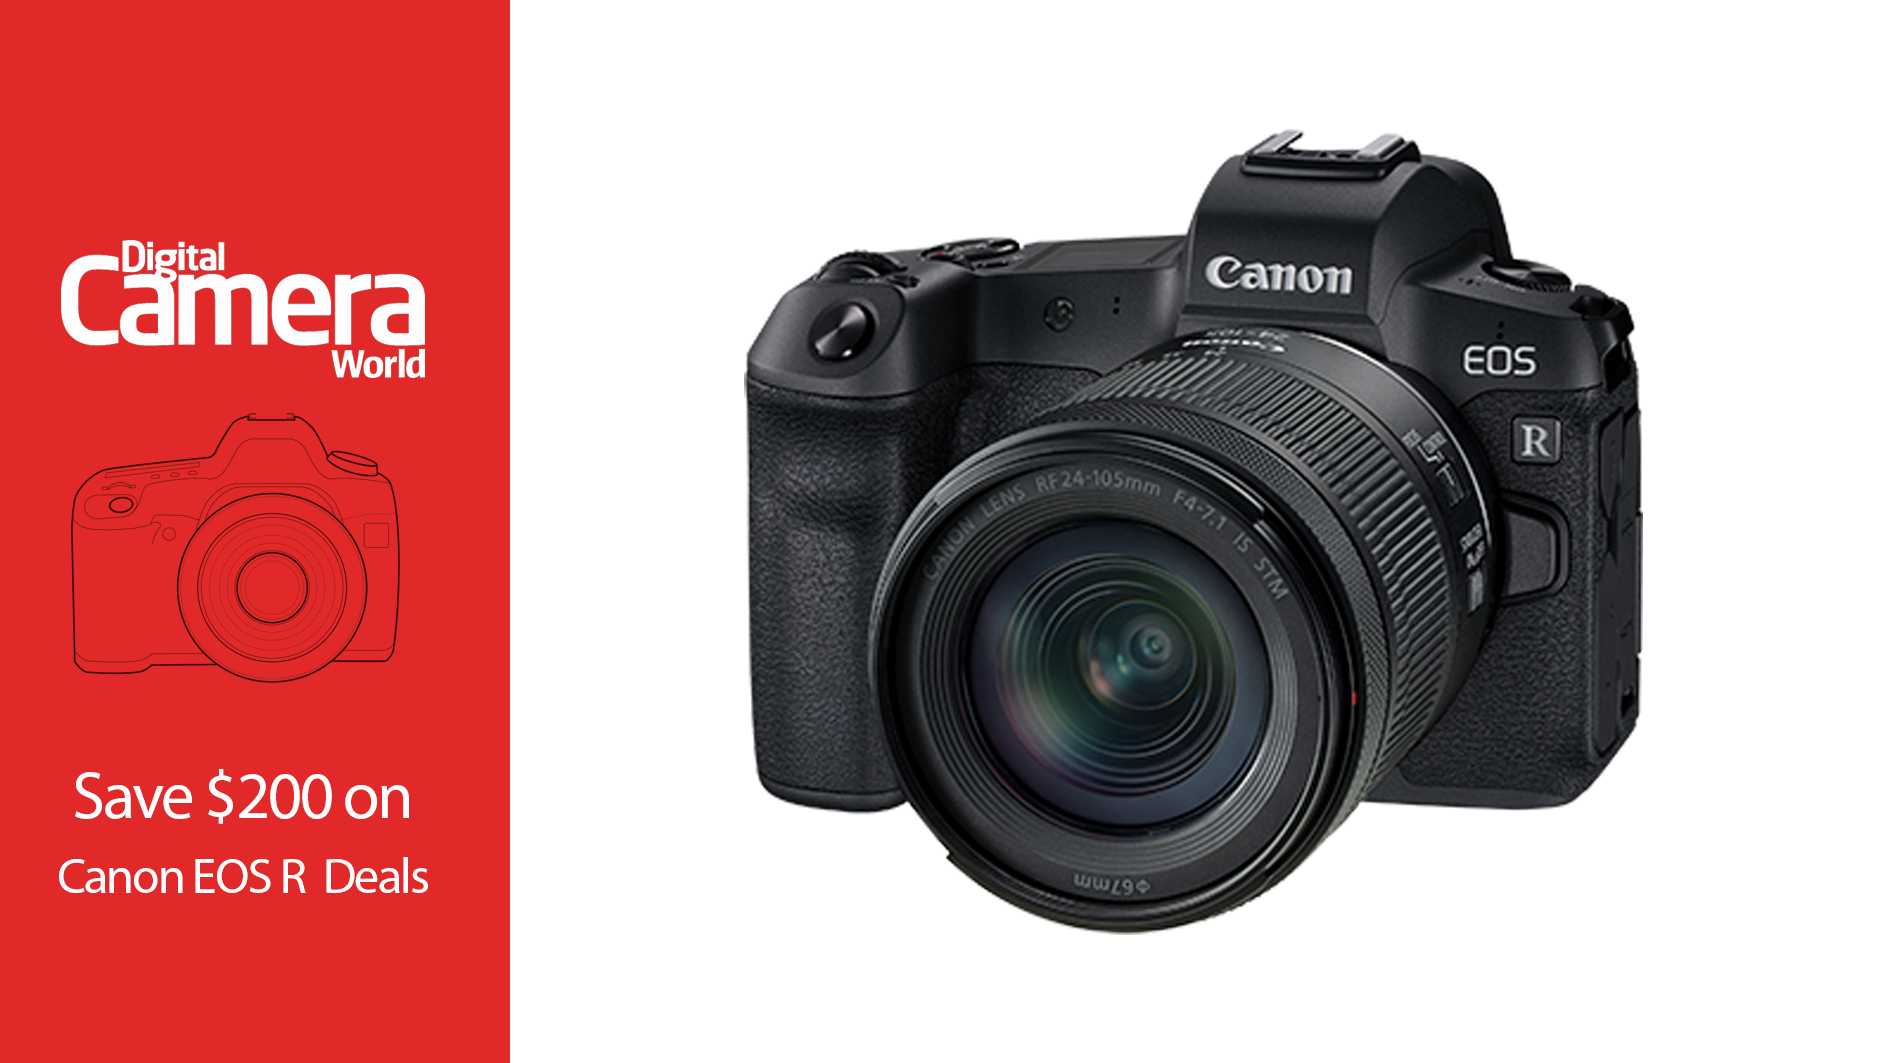 $200 slashed off EOS at Canon's own store Digital Camera World